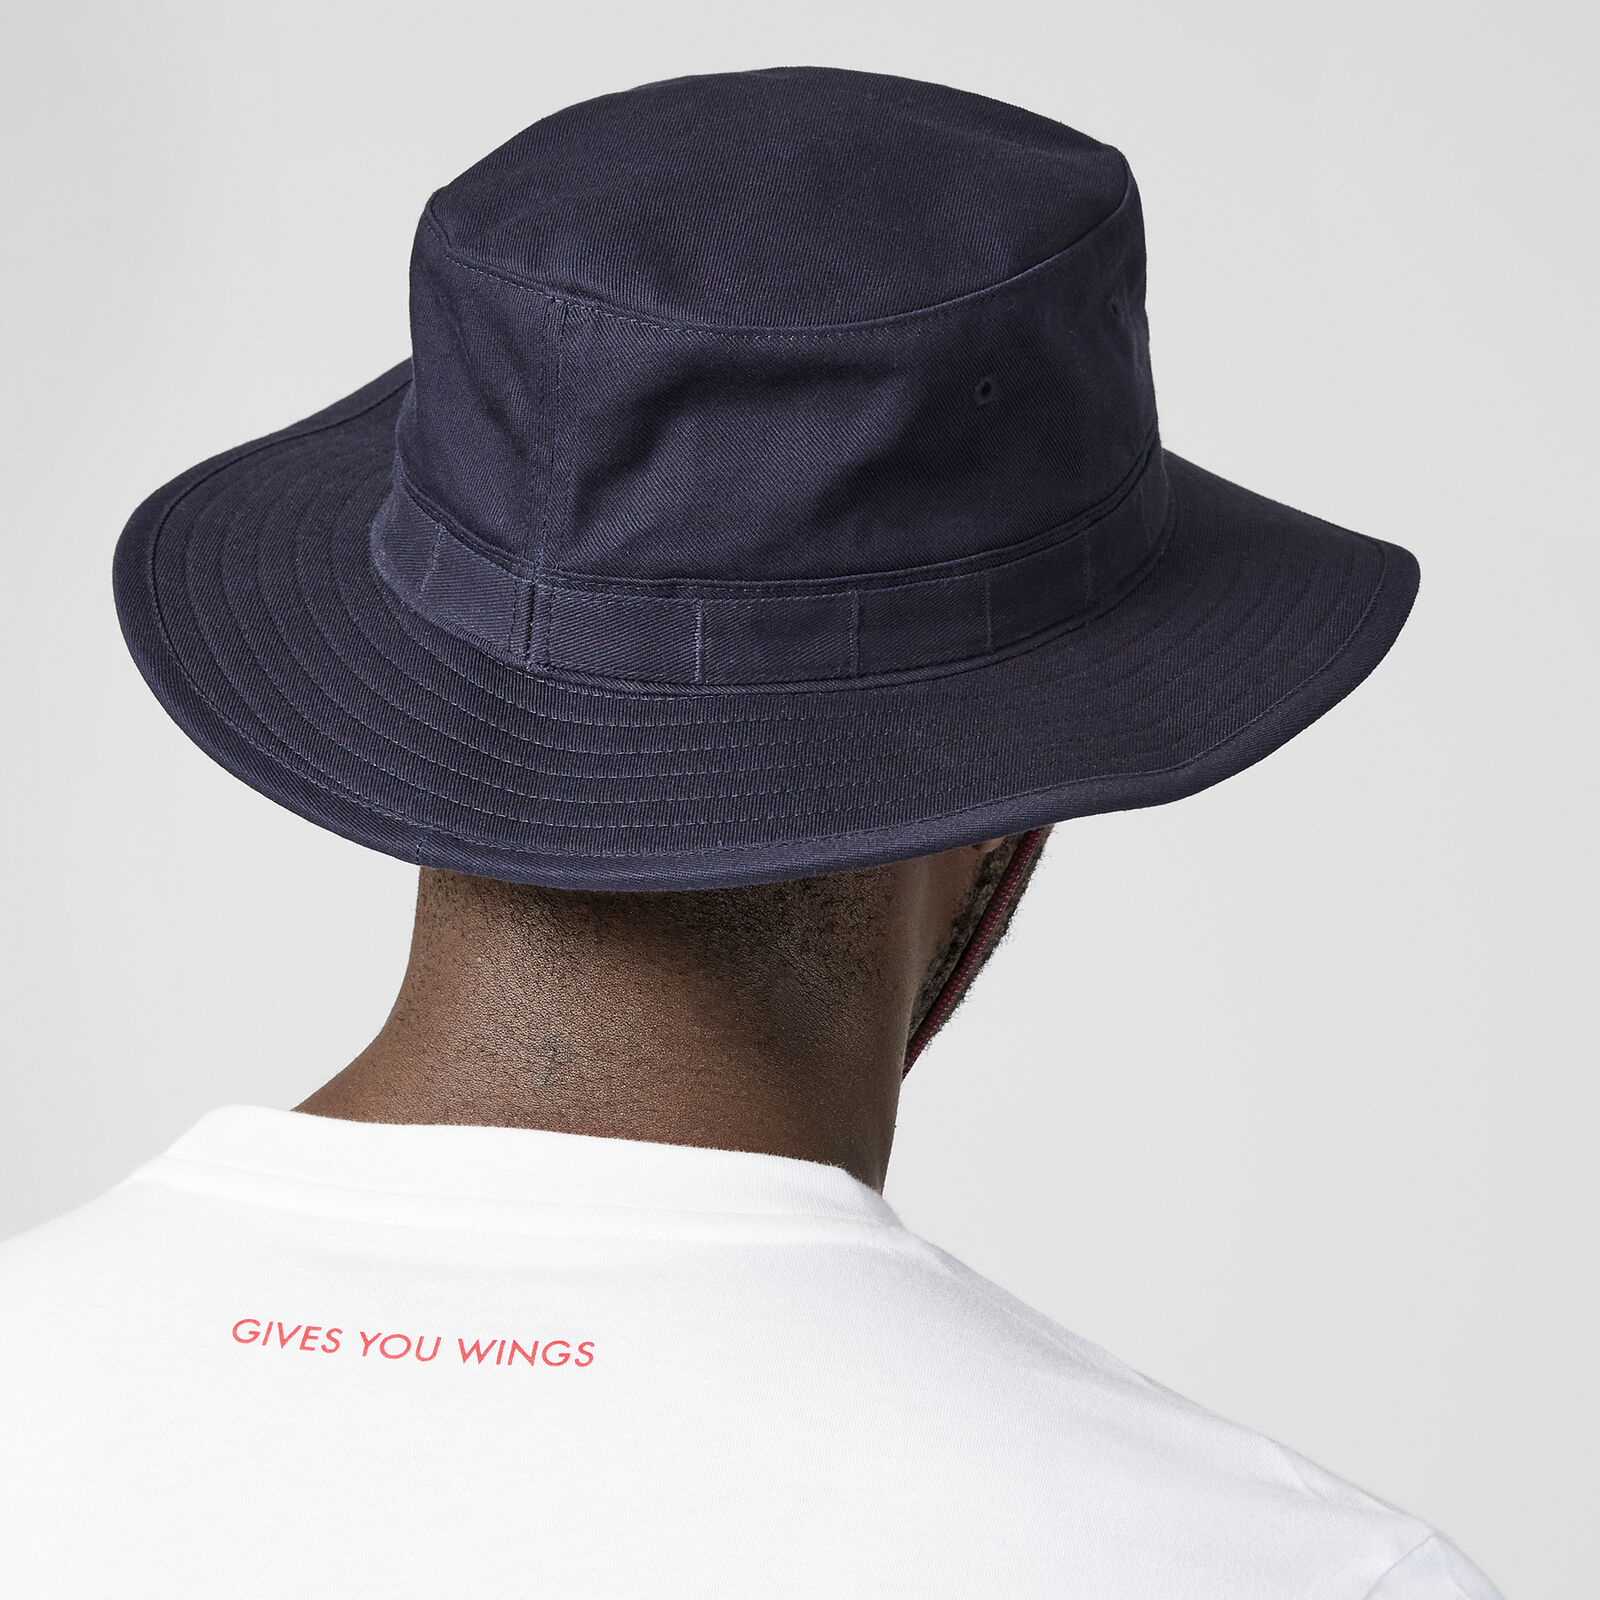 Bucket Hat - Aston Martin Red Bull Racing | Fuel For Fans